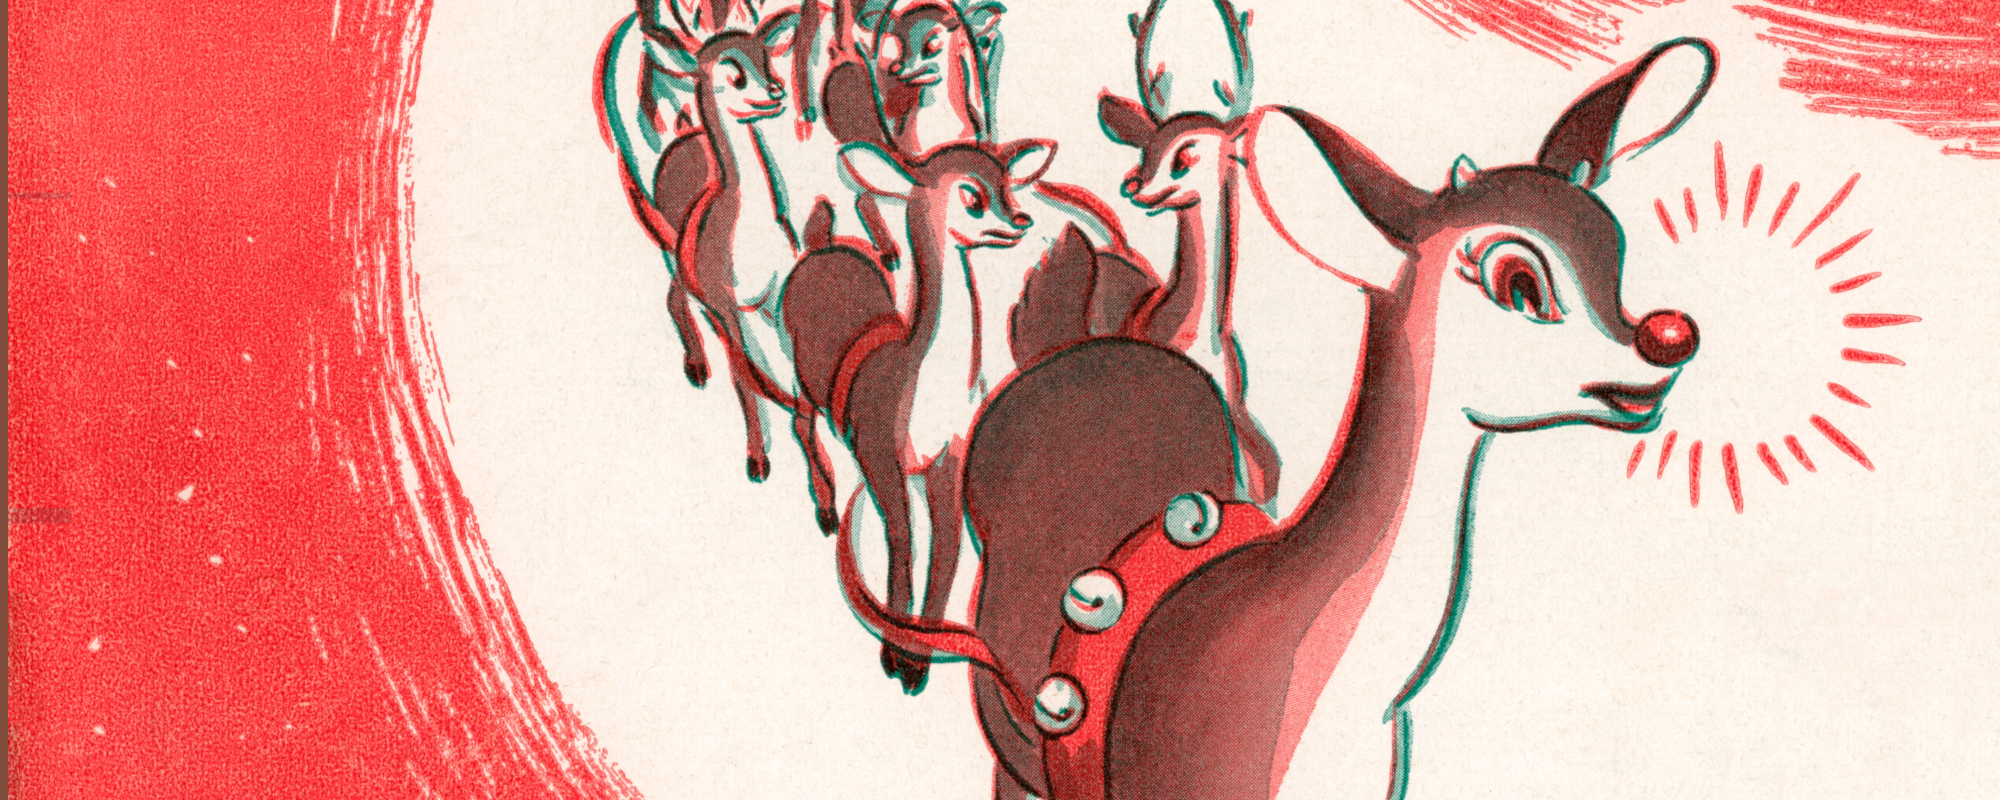 Behind the History and the Meaning of the Name (and Song): “Rudolph the Red-Nosed Reindeer”